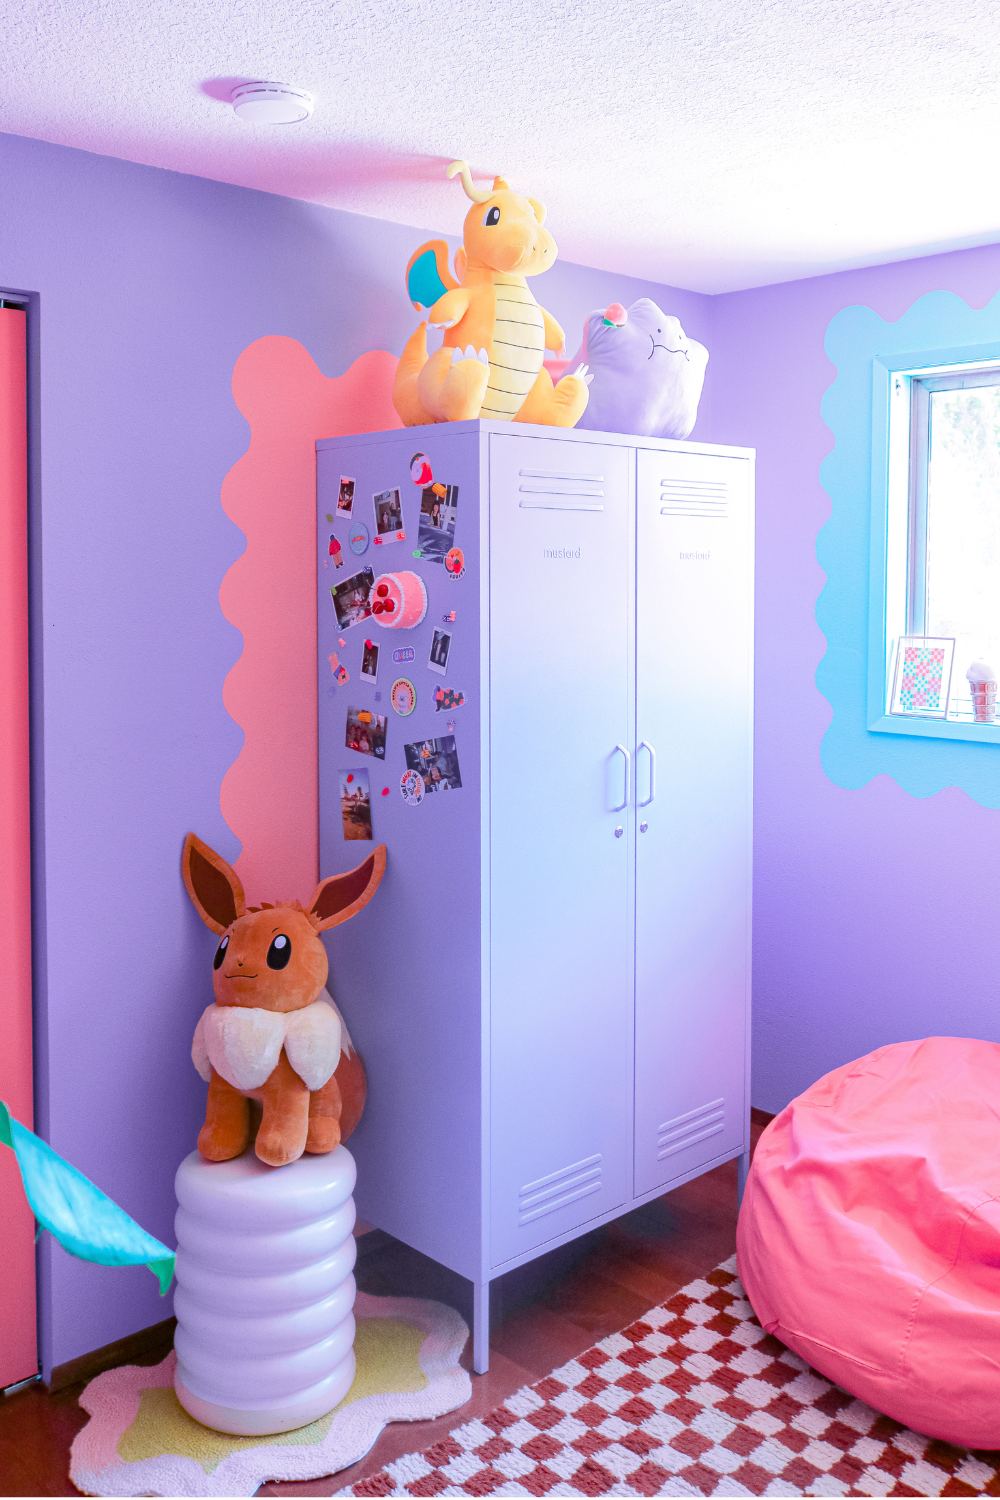 A Lilac Twinny stands in a lilac painted room with a pink wiggly feature painted around it. There are Pokemon stuffed toys next to and on top of the locker, and one side of it is covered in magnets.